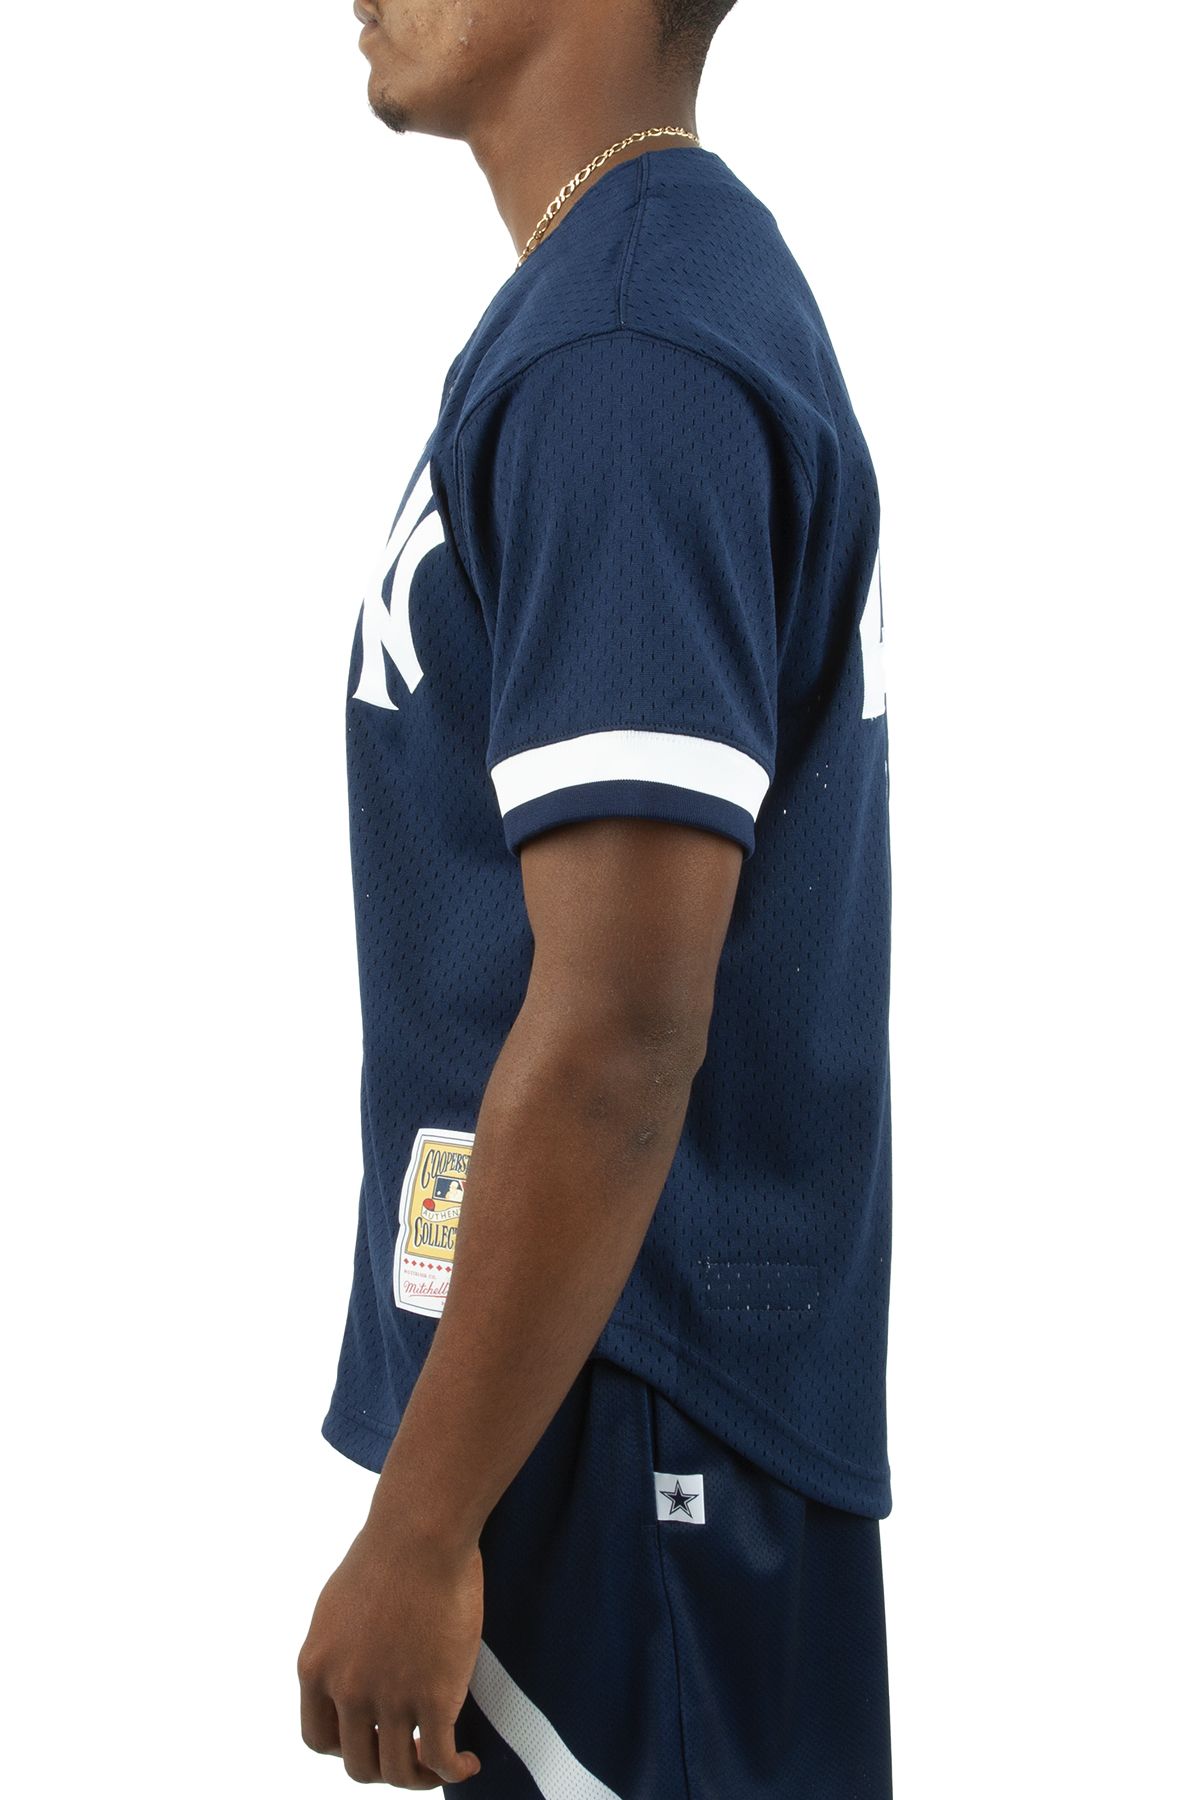 Mitchell & Ness Authentic Reggie Jackson New York Yankees 1997 Button Front Jersey